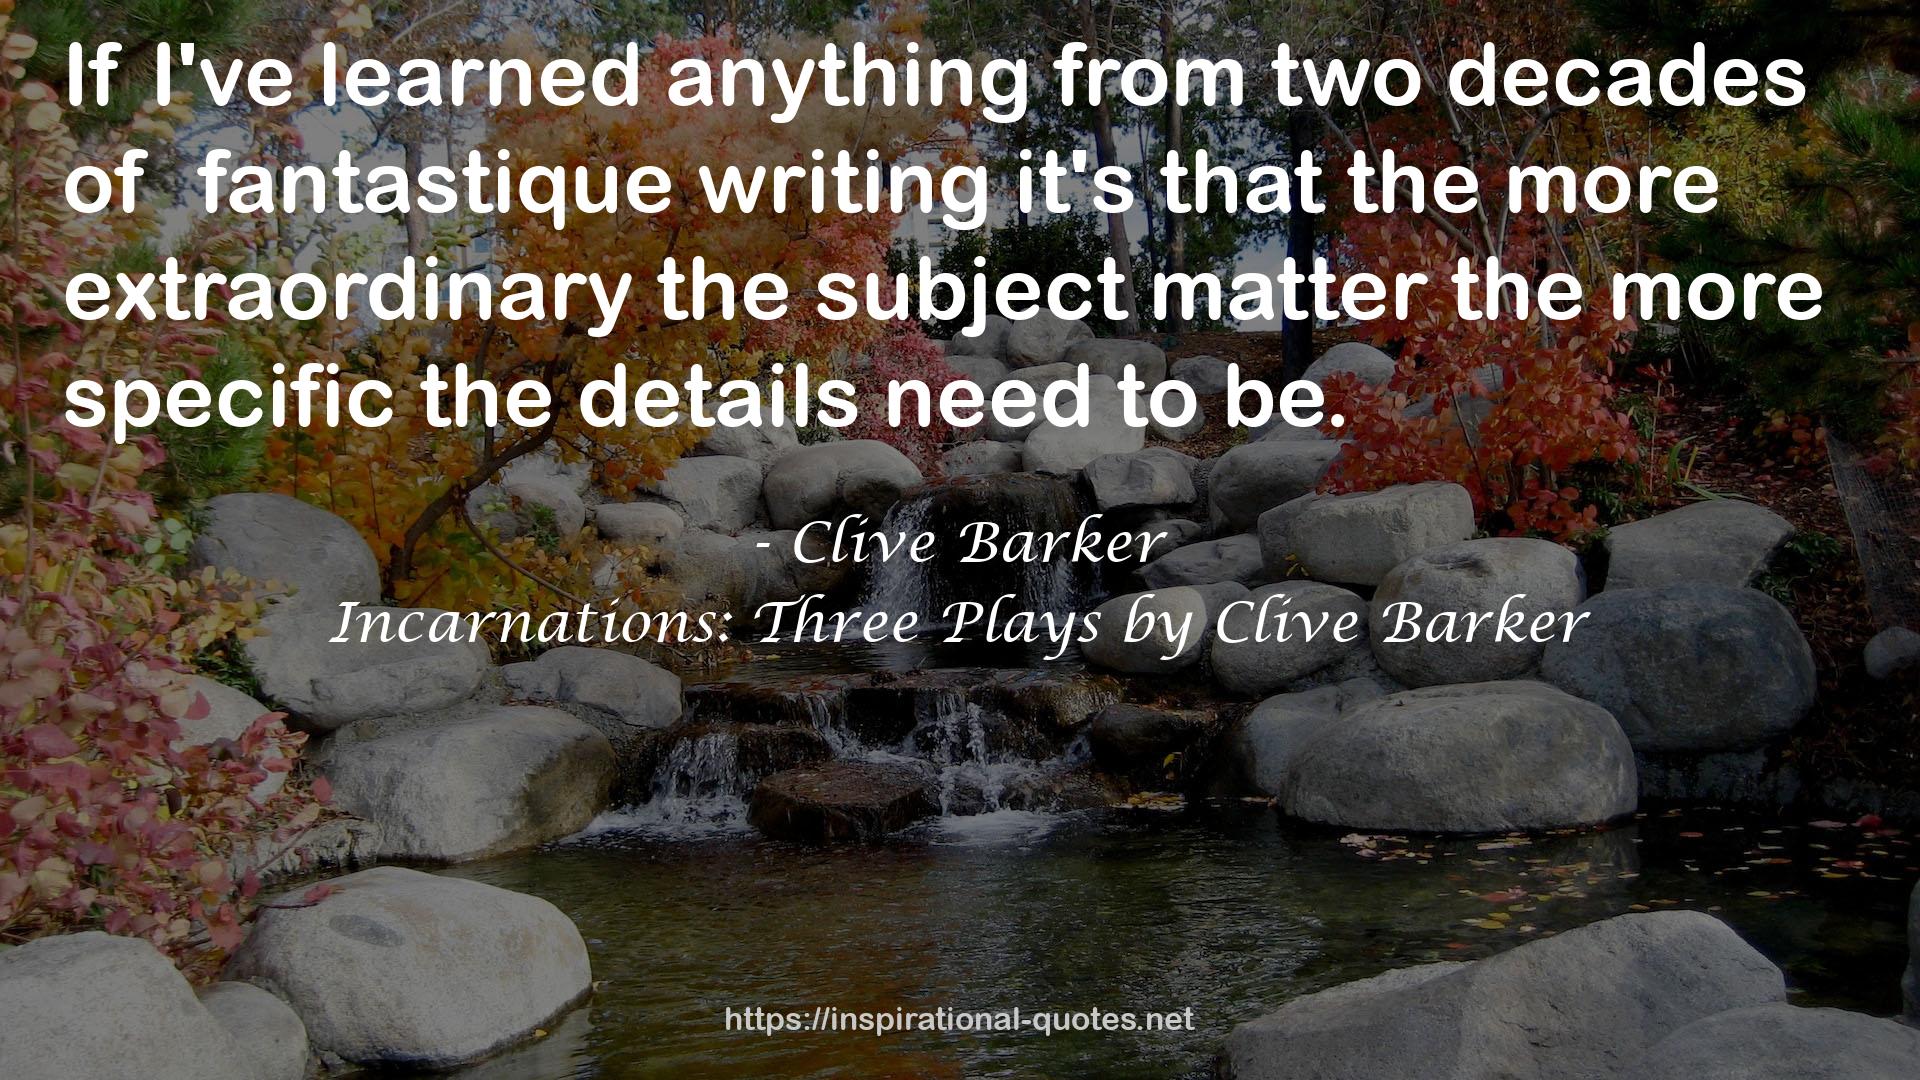 Incarnations: Three Plays by Clive Barker QUOTES